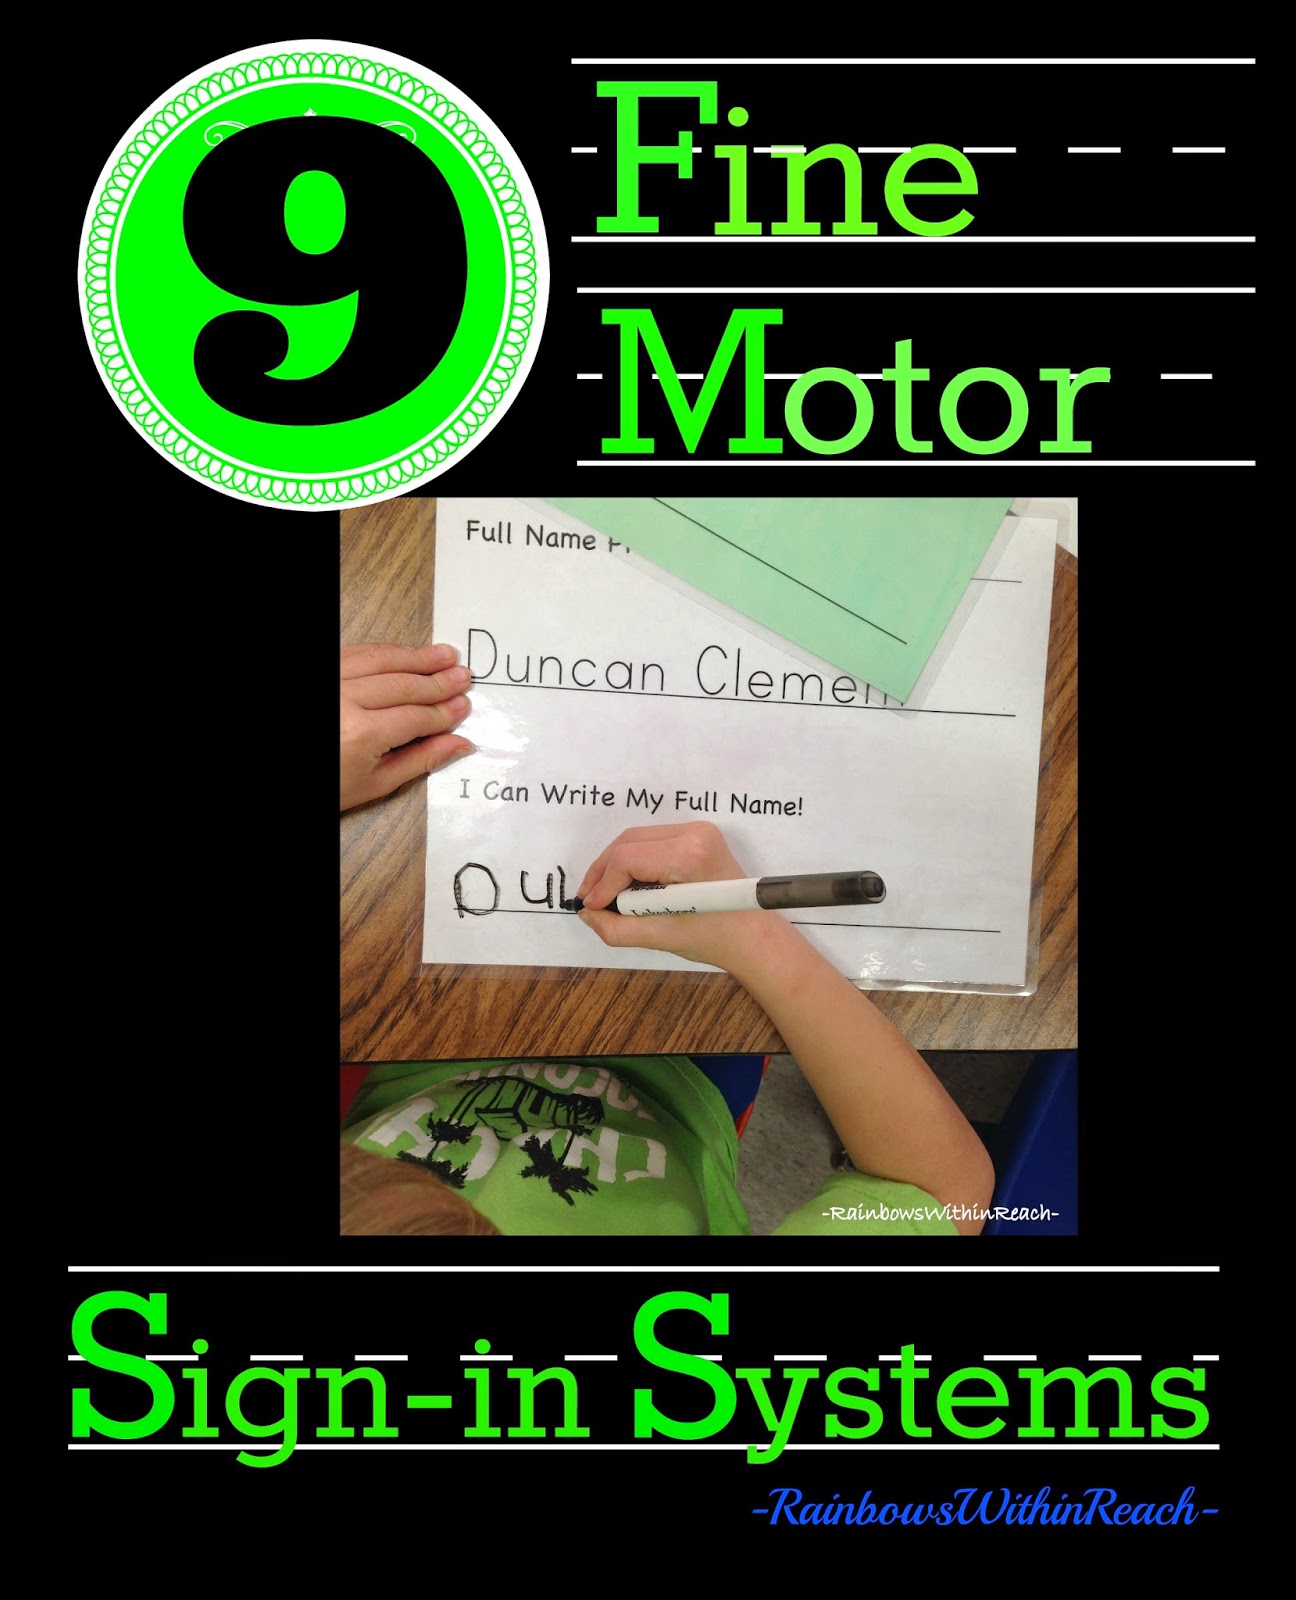 9 Methods of Fine Motor "Sign-in Systems" in PreK +K Classrooms via RainbowsWithinReach